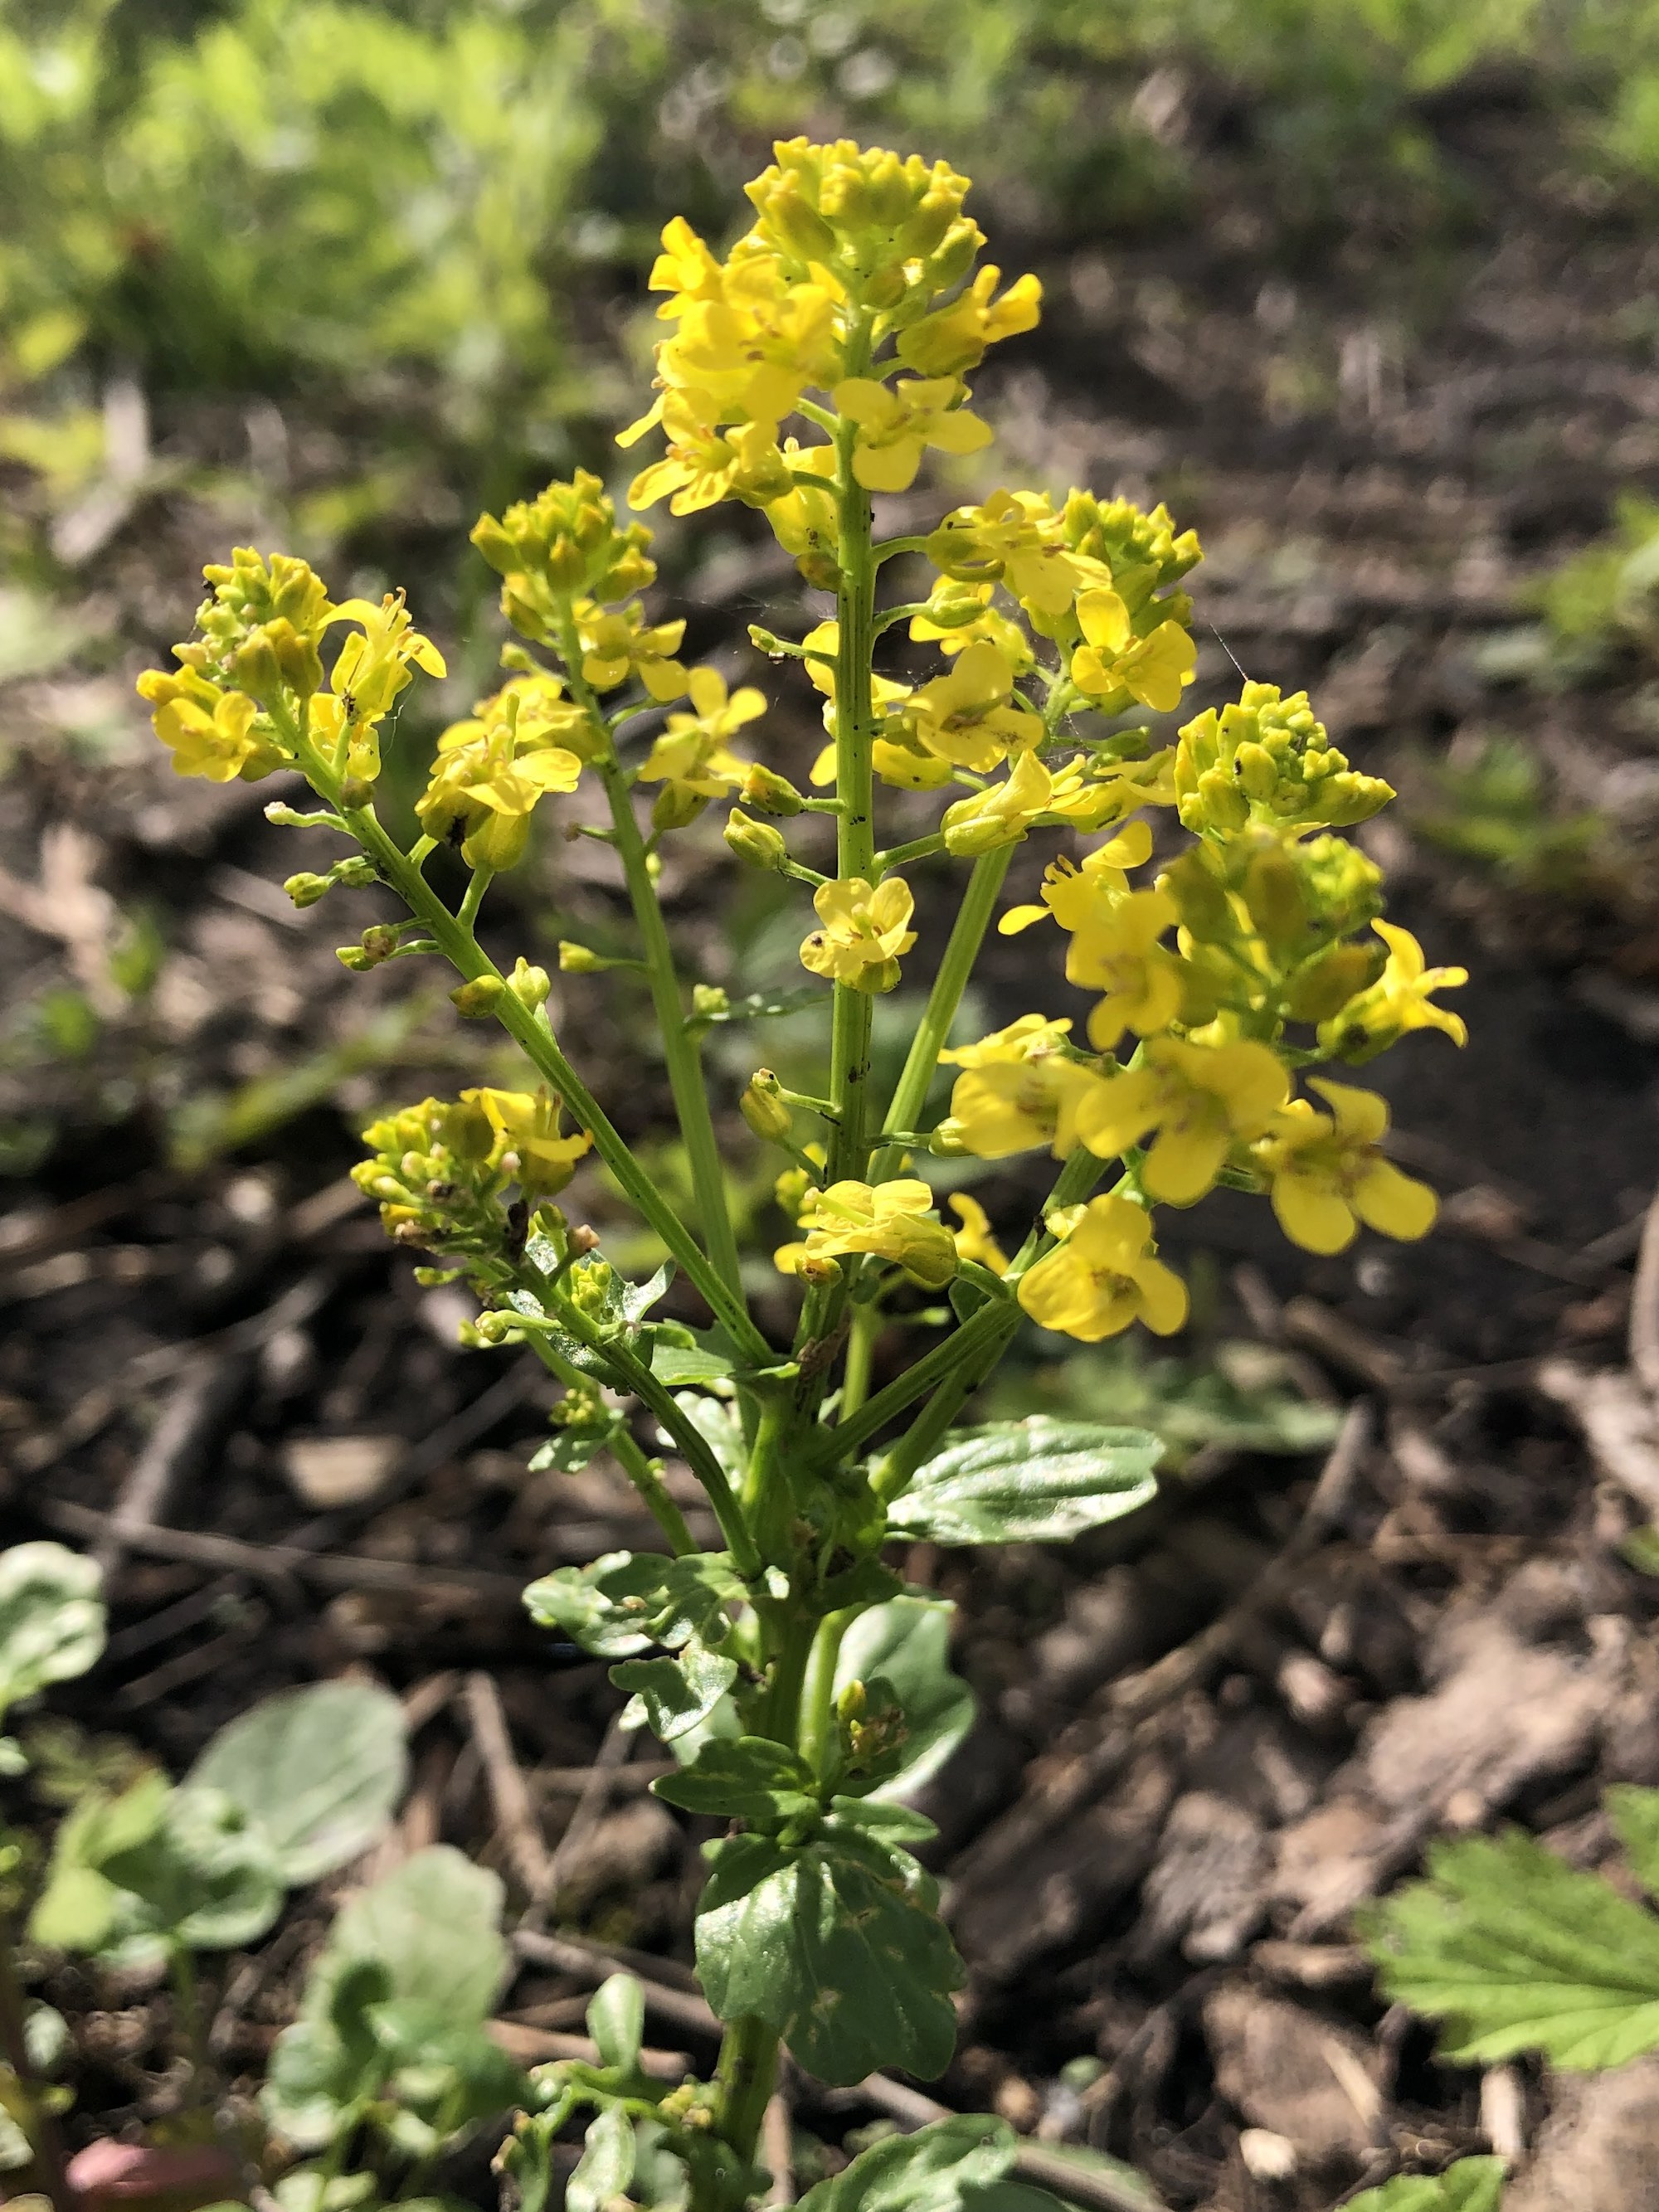 Garden Yellow Rocket in woods between Marion Dunn and Oak Savanna in Madison, Wisconsin on May 4, 2021.